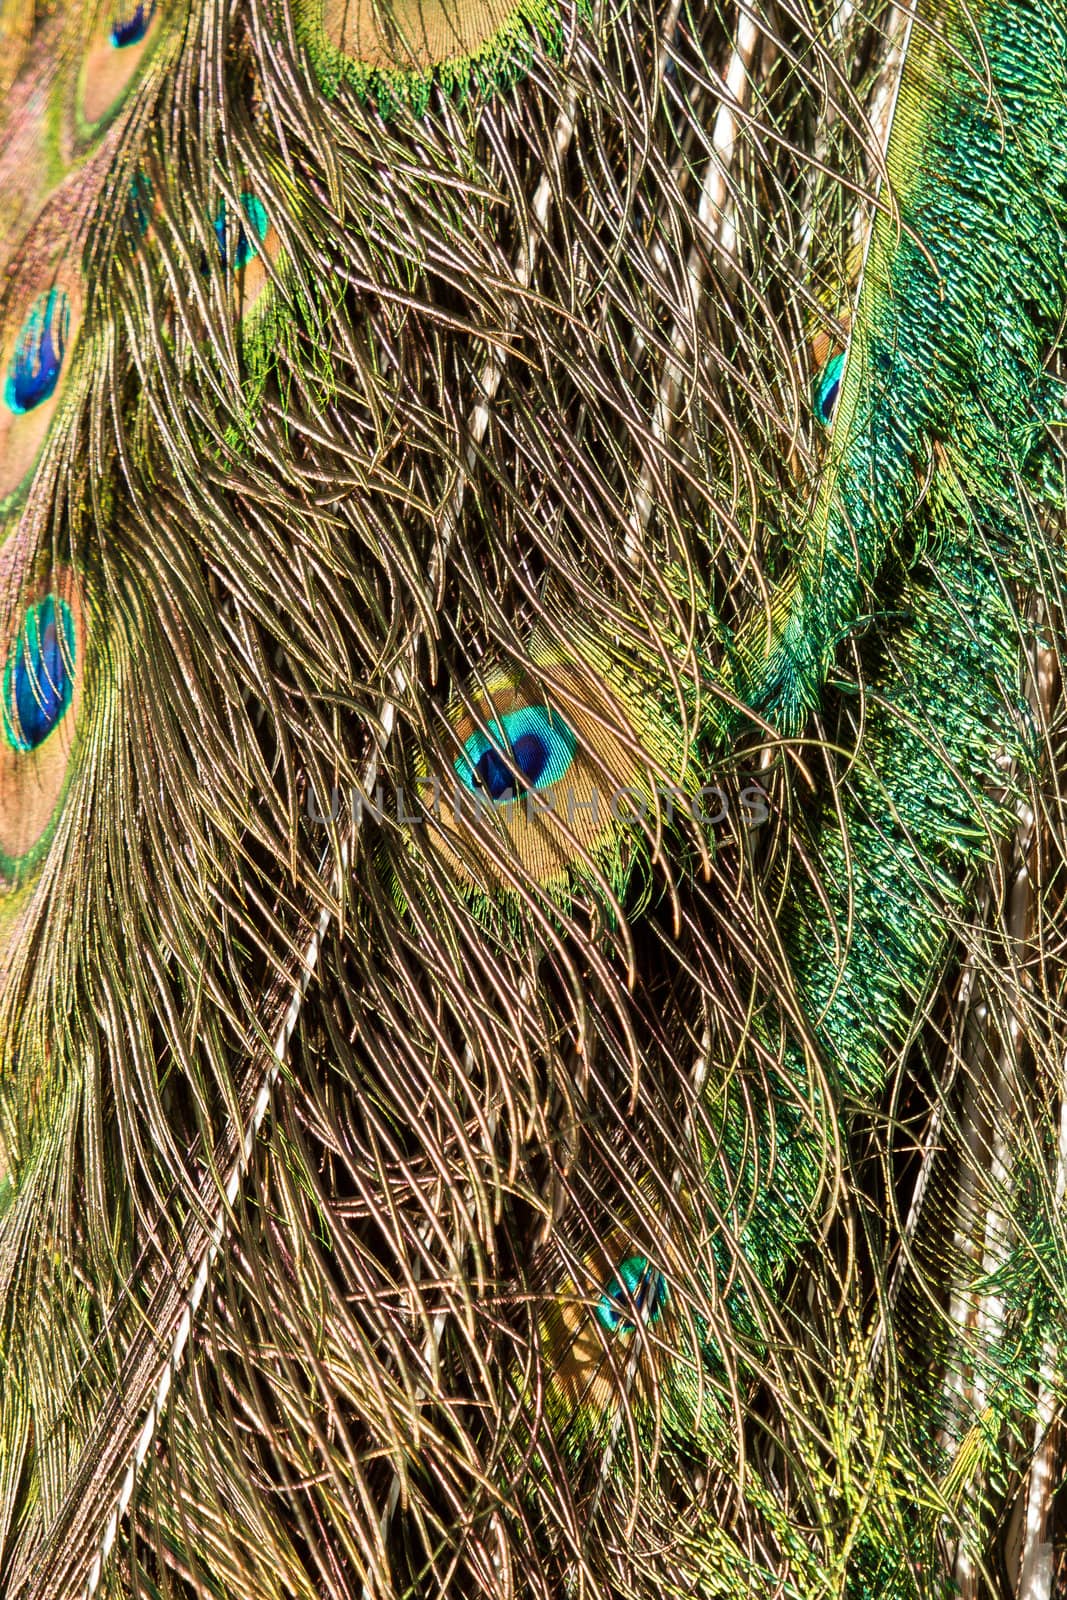 Feathers of a male peacock by michaklootwijk